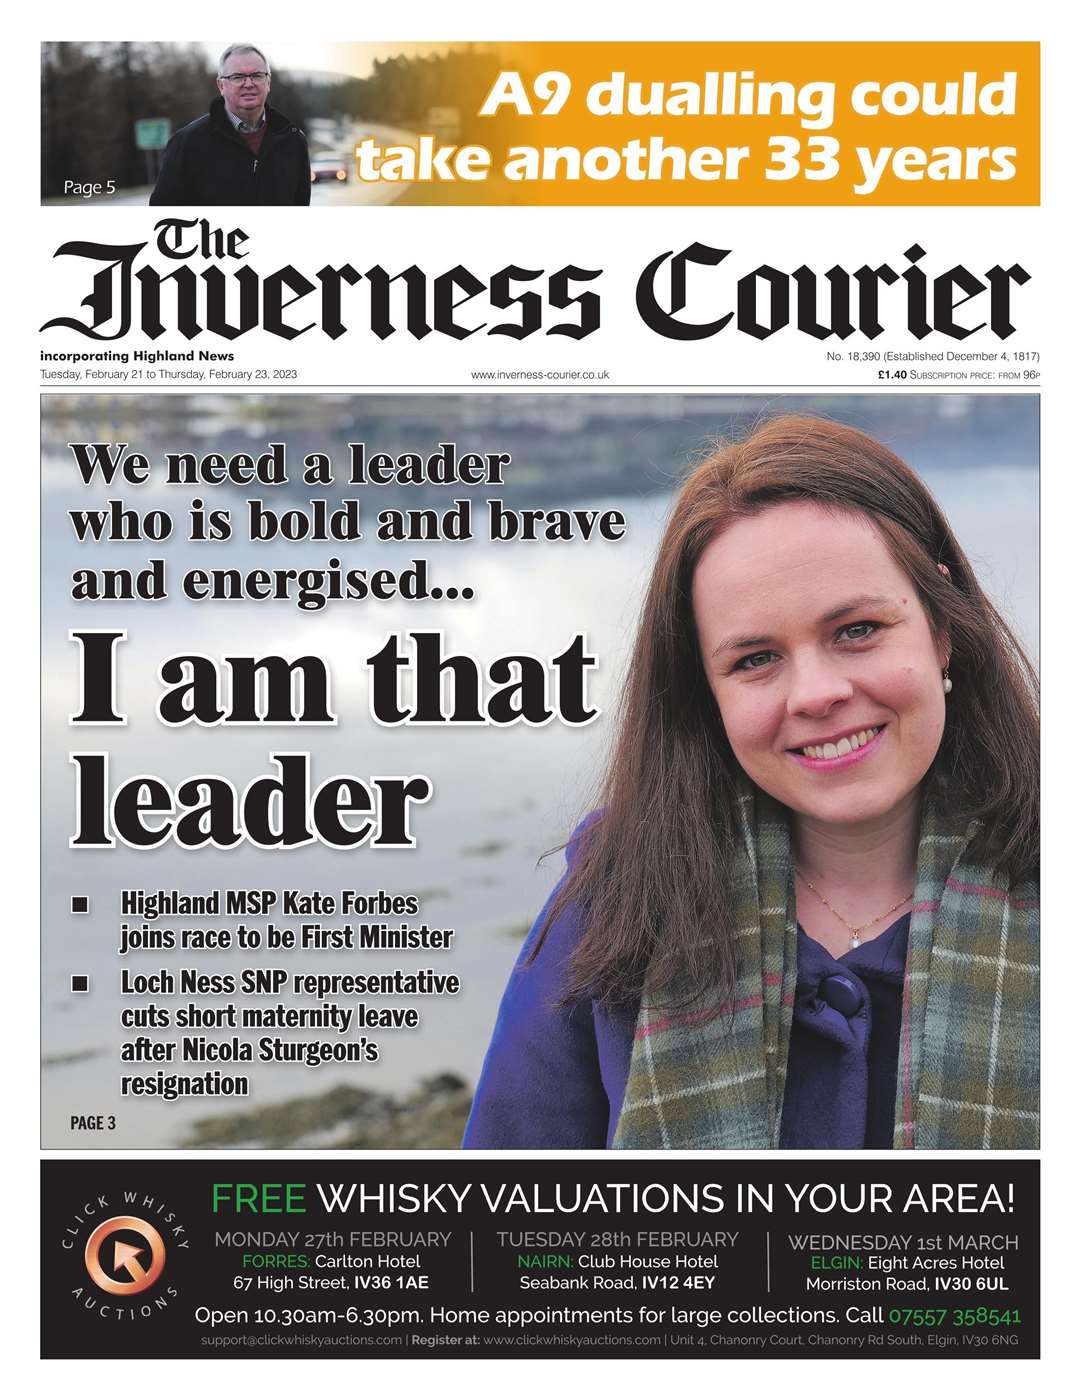 The Inverness Courier, February 21, front page.